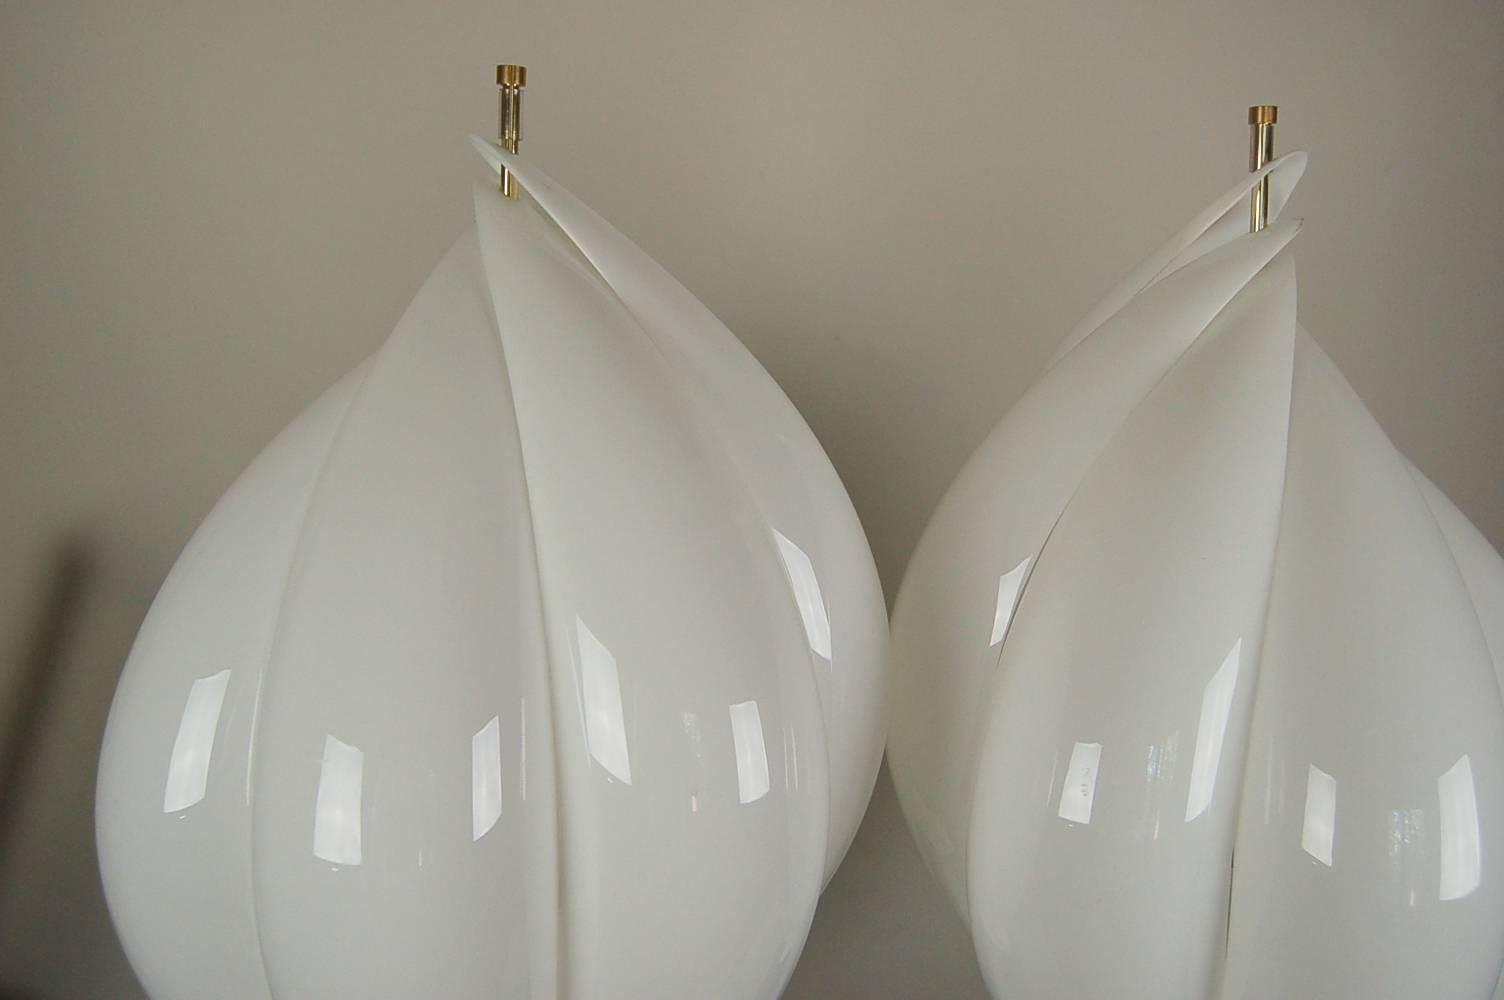 Matched Pair of Acrylic Petal Table Lamps by Rougier, 1970's For Sale 4